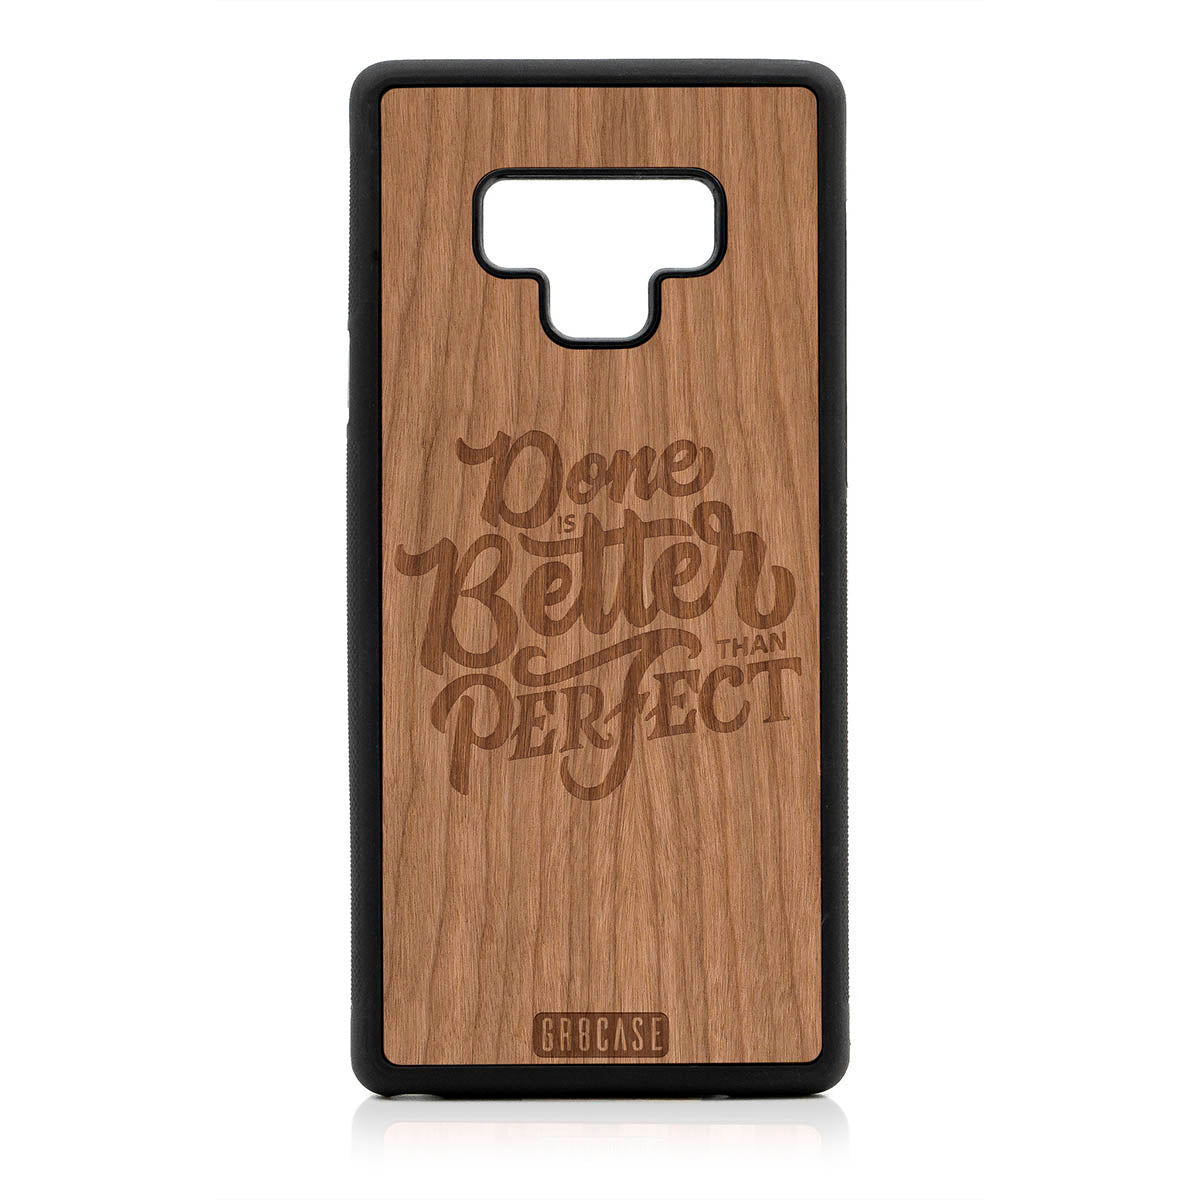 Done Is Better Than Perfect Design Wood Case For Samsung Galaxy Note 9 by GR8CASE